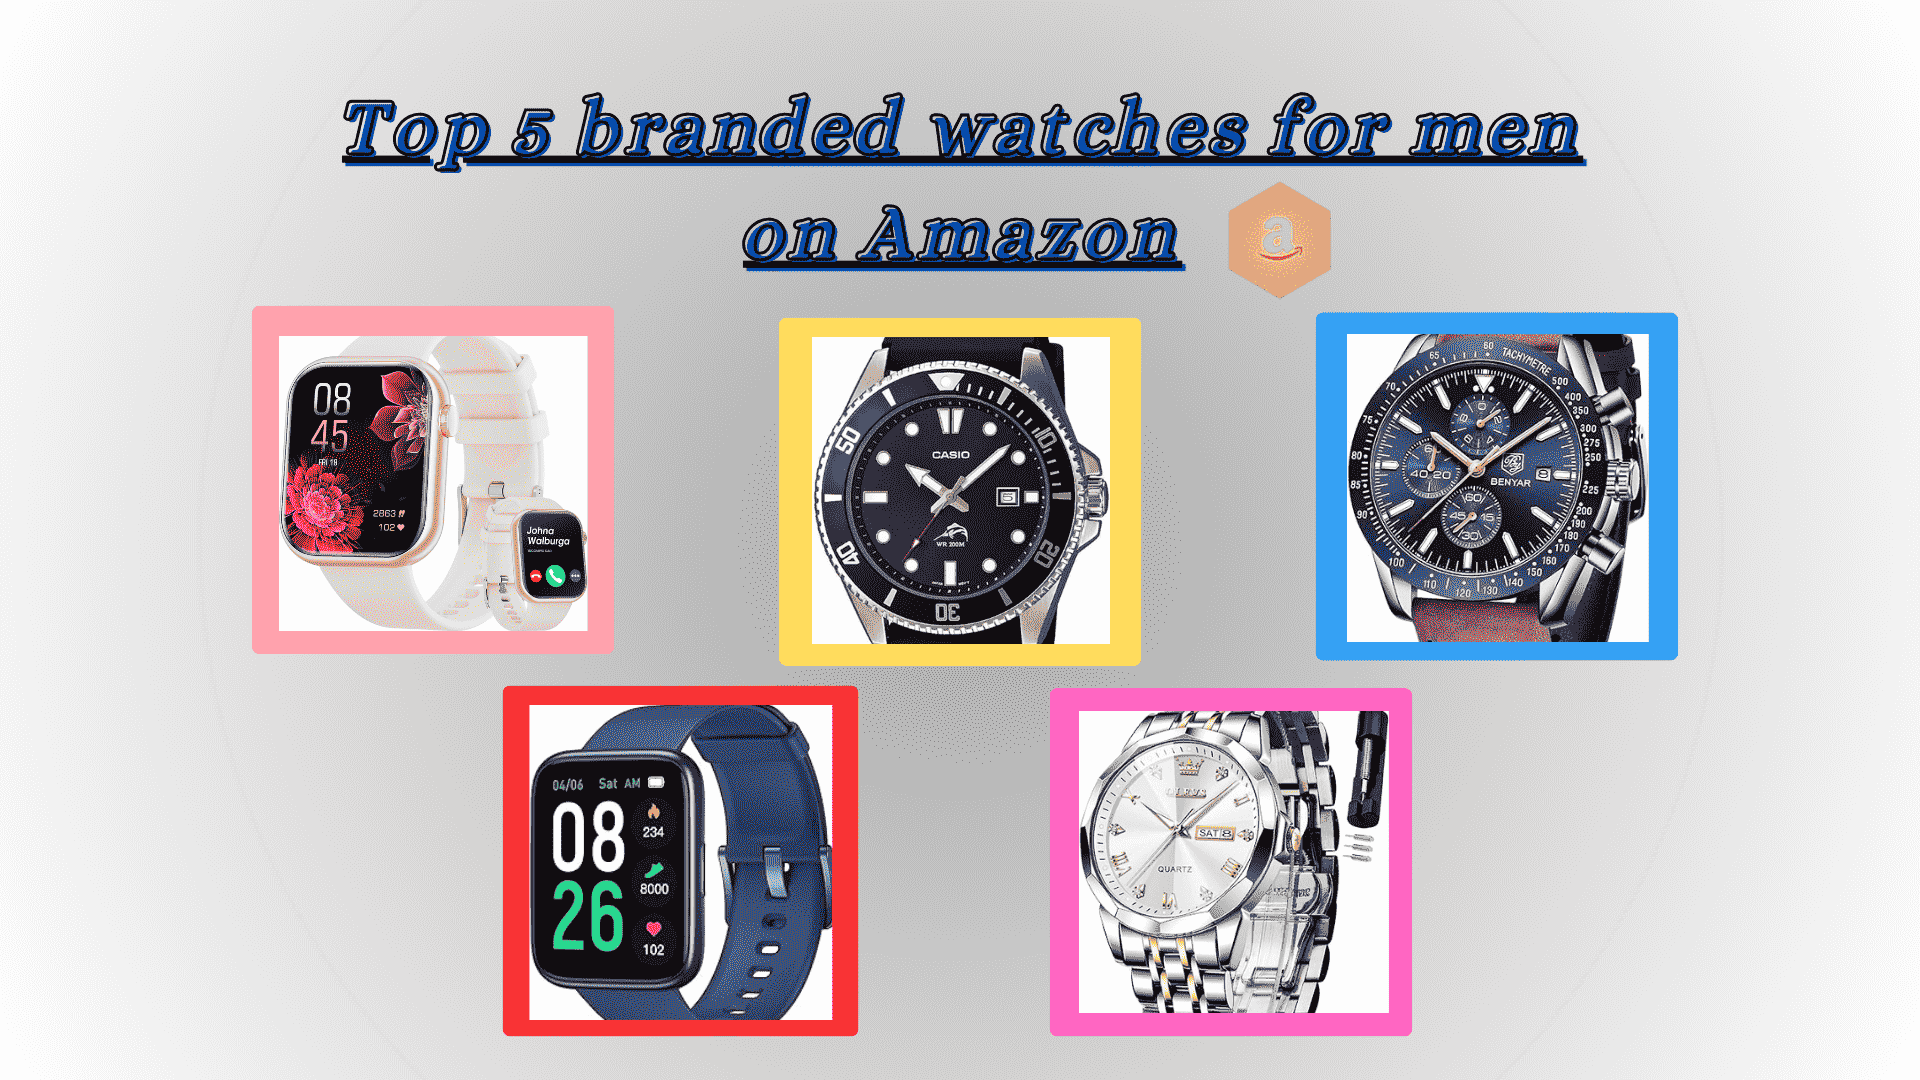 Top 5 branded watches for men on Amazon